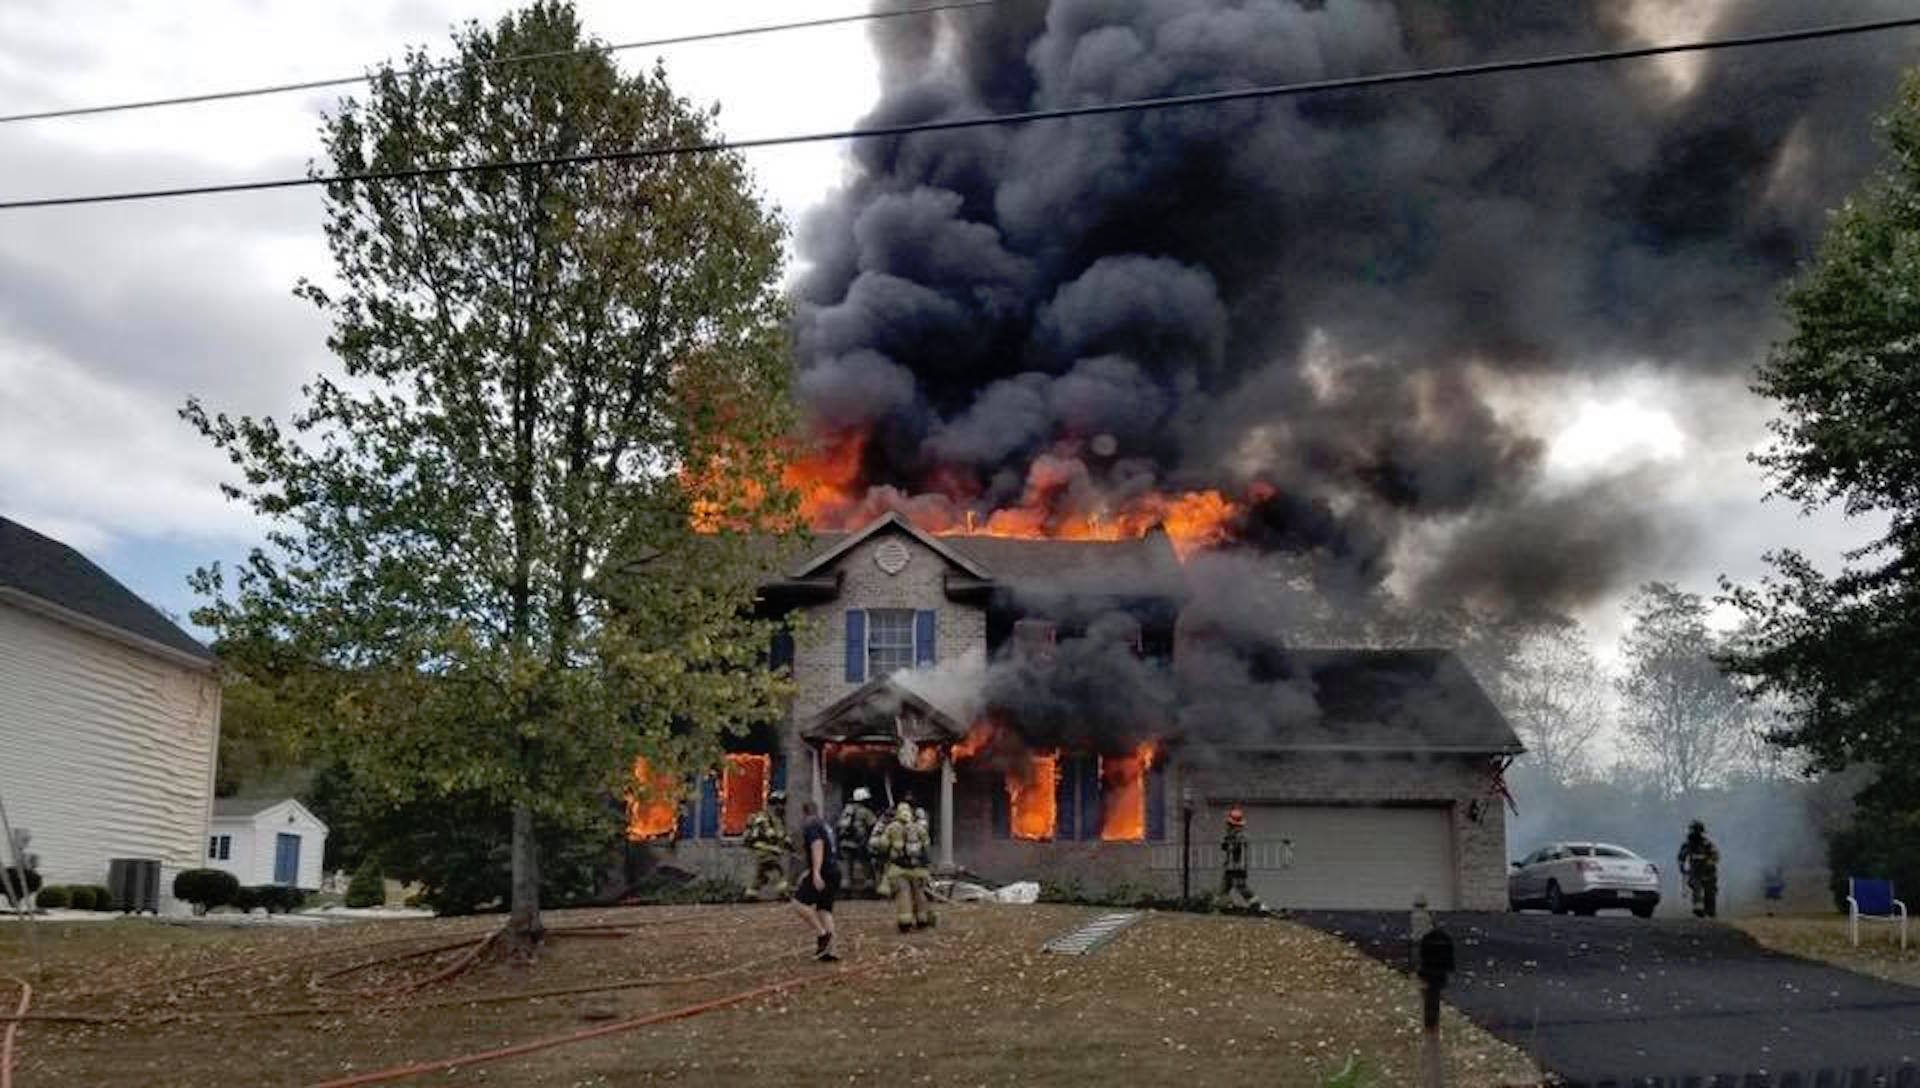 Dan and Heather Adamson's house in Hamilton Township was destroyed by fire in September. The reconstruction of their home has been held up by Gov. Tom Wolf's business closure order.